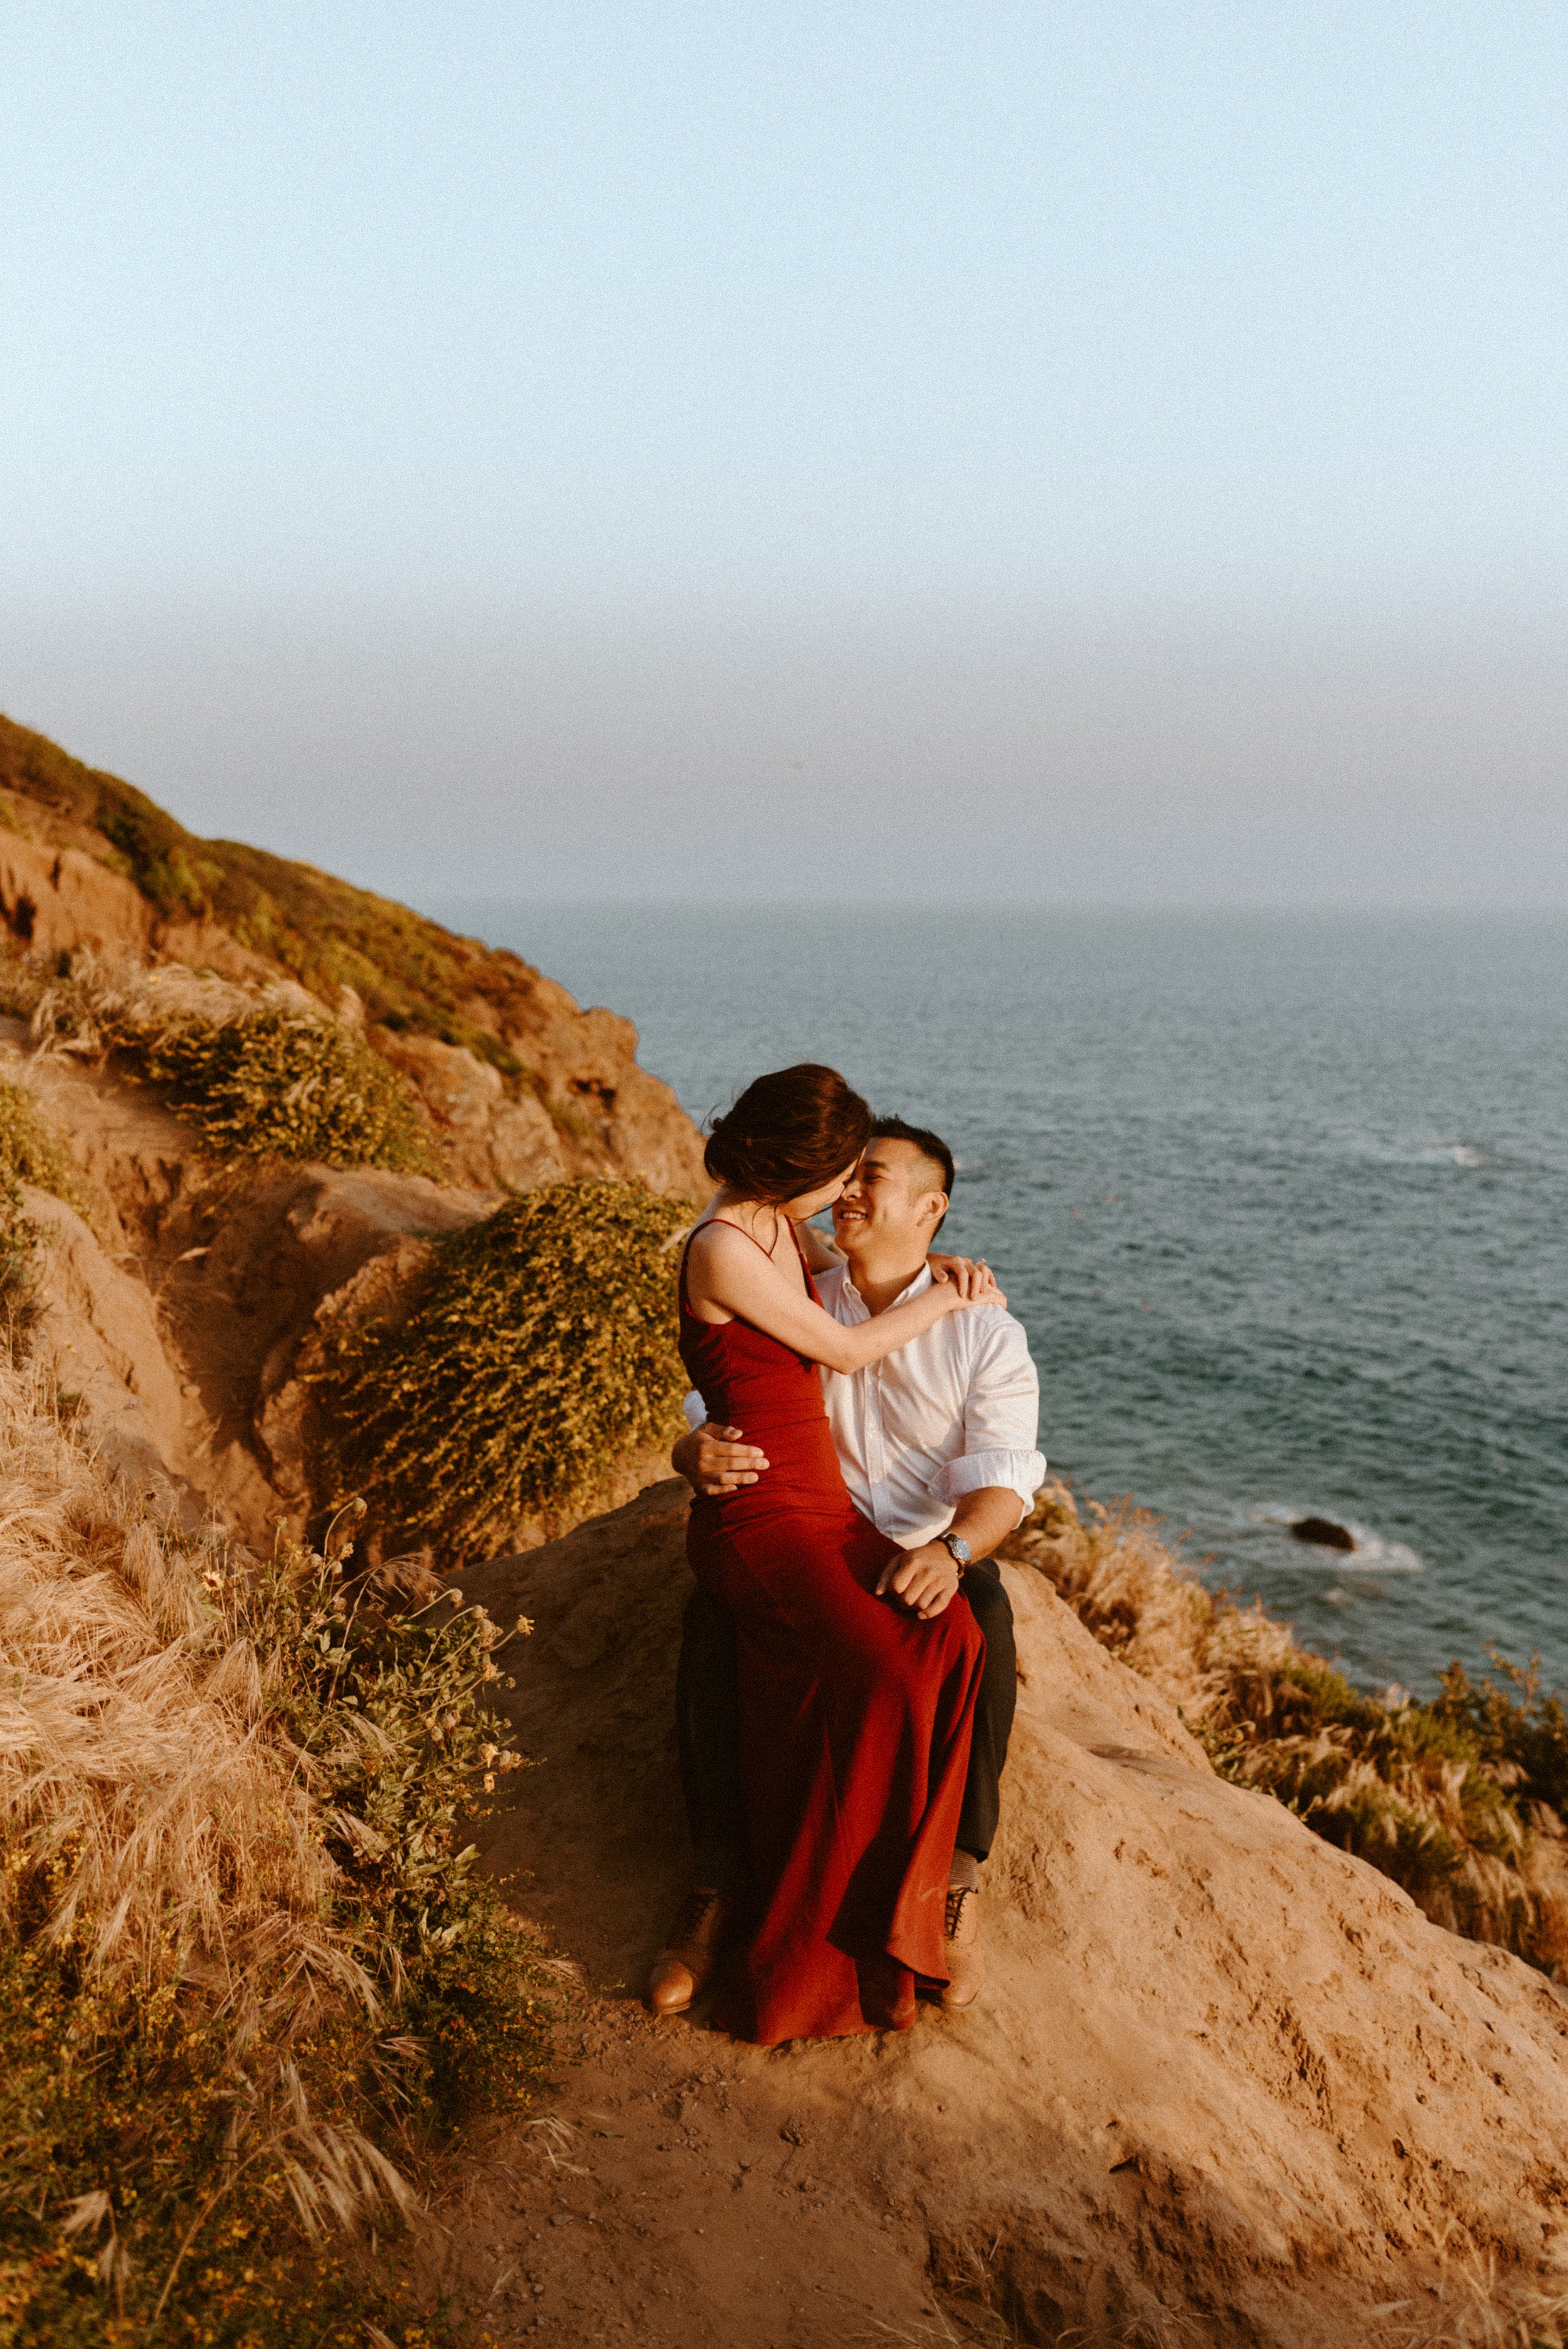 Best Engagement Session Locations in Southern California - Point Dume, Malibu | California Wedding Photographer